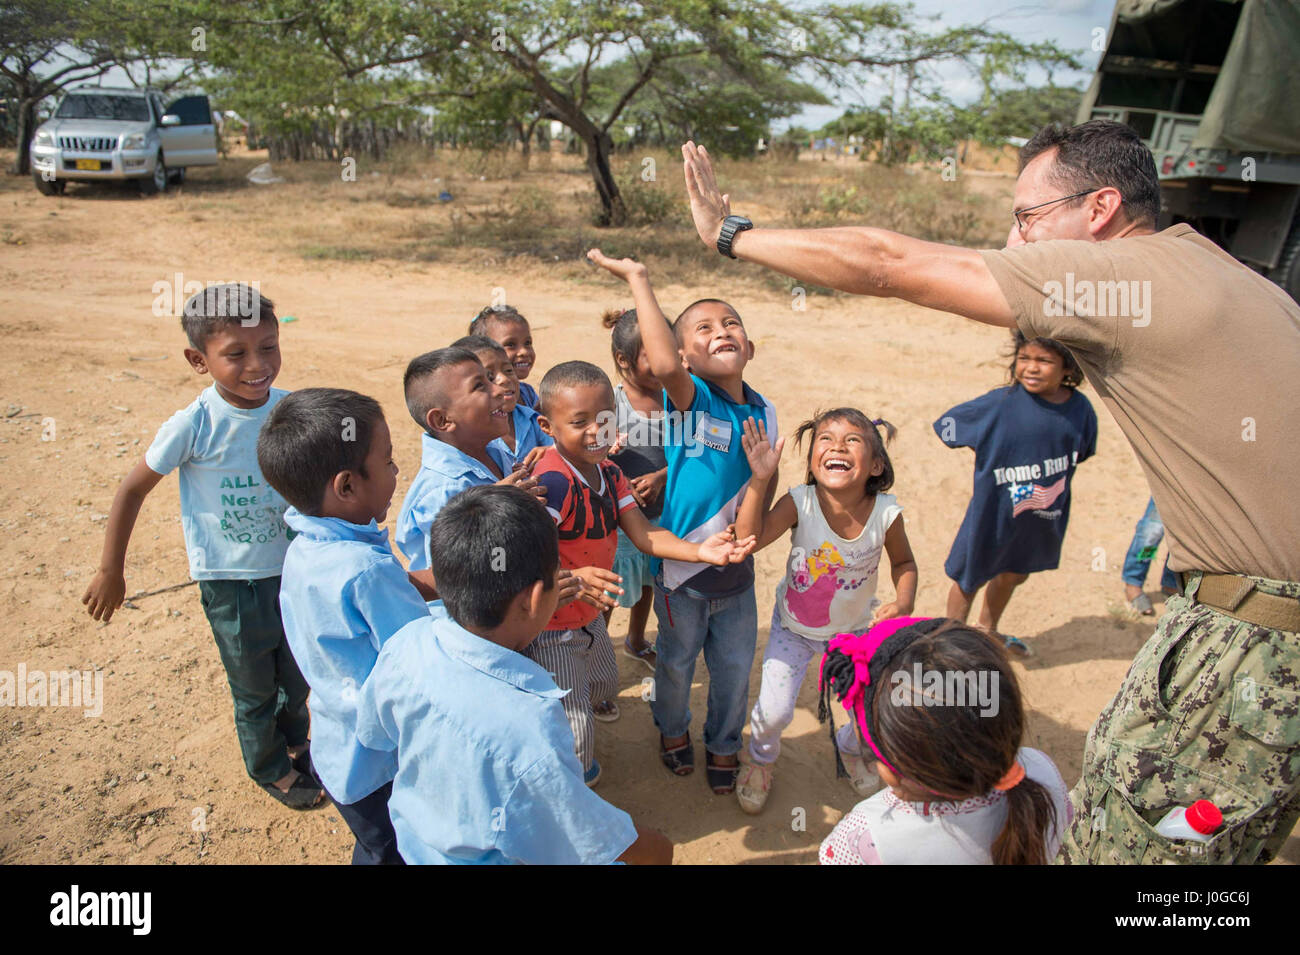 170330-N-YL073-061 MAYAPO, Colombia (March 30, 2017) - Engineering Aide 2nd Class Gabriel Jimenez, a native of Colombia assigned to Construction Battalion Maintenance Unit (CBMU) 202, high fives children from a Wayuu tribe in Mayapo, Colombia, during Continuing Promise 2017 (CP-17). CP-17 is a U.S. Southern Command-sponsored and U.S. Naval Forces Southern Command/U.S. 4th Fleet-conducted deployment to conduct civil-military operations including humanitarian assistance, training engagements, medical, dental, and veterinary support in an effort to show U.S. support and commitment to Central and  Stock Photo